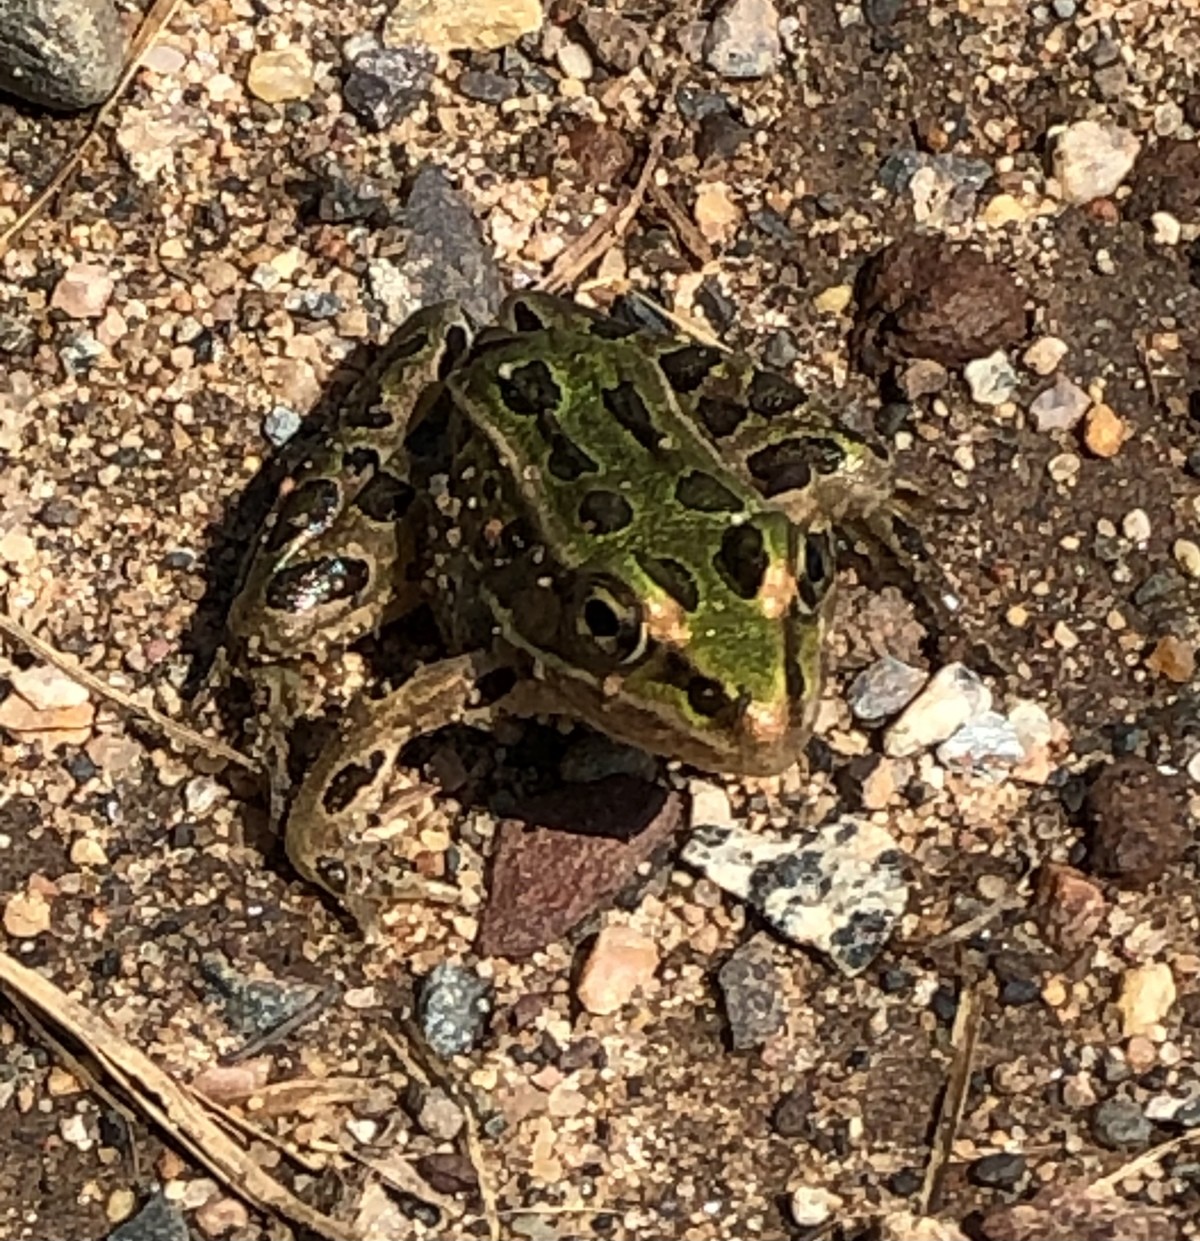 It is Wednesday my dudes. Found this lil dude while walking my dog... He’s here to welcome you to Wednesday